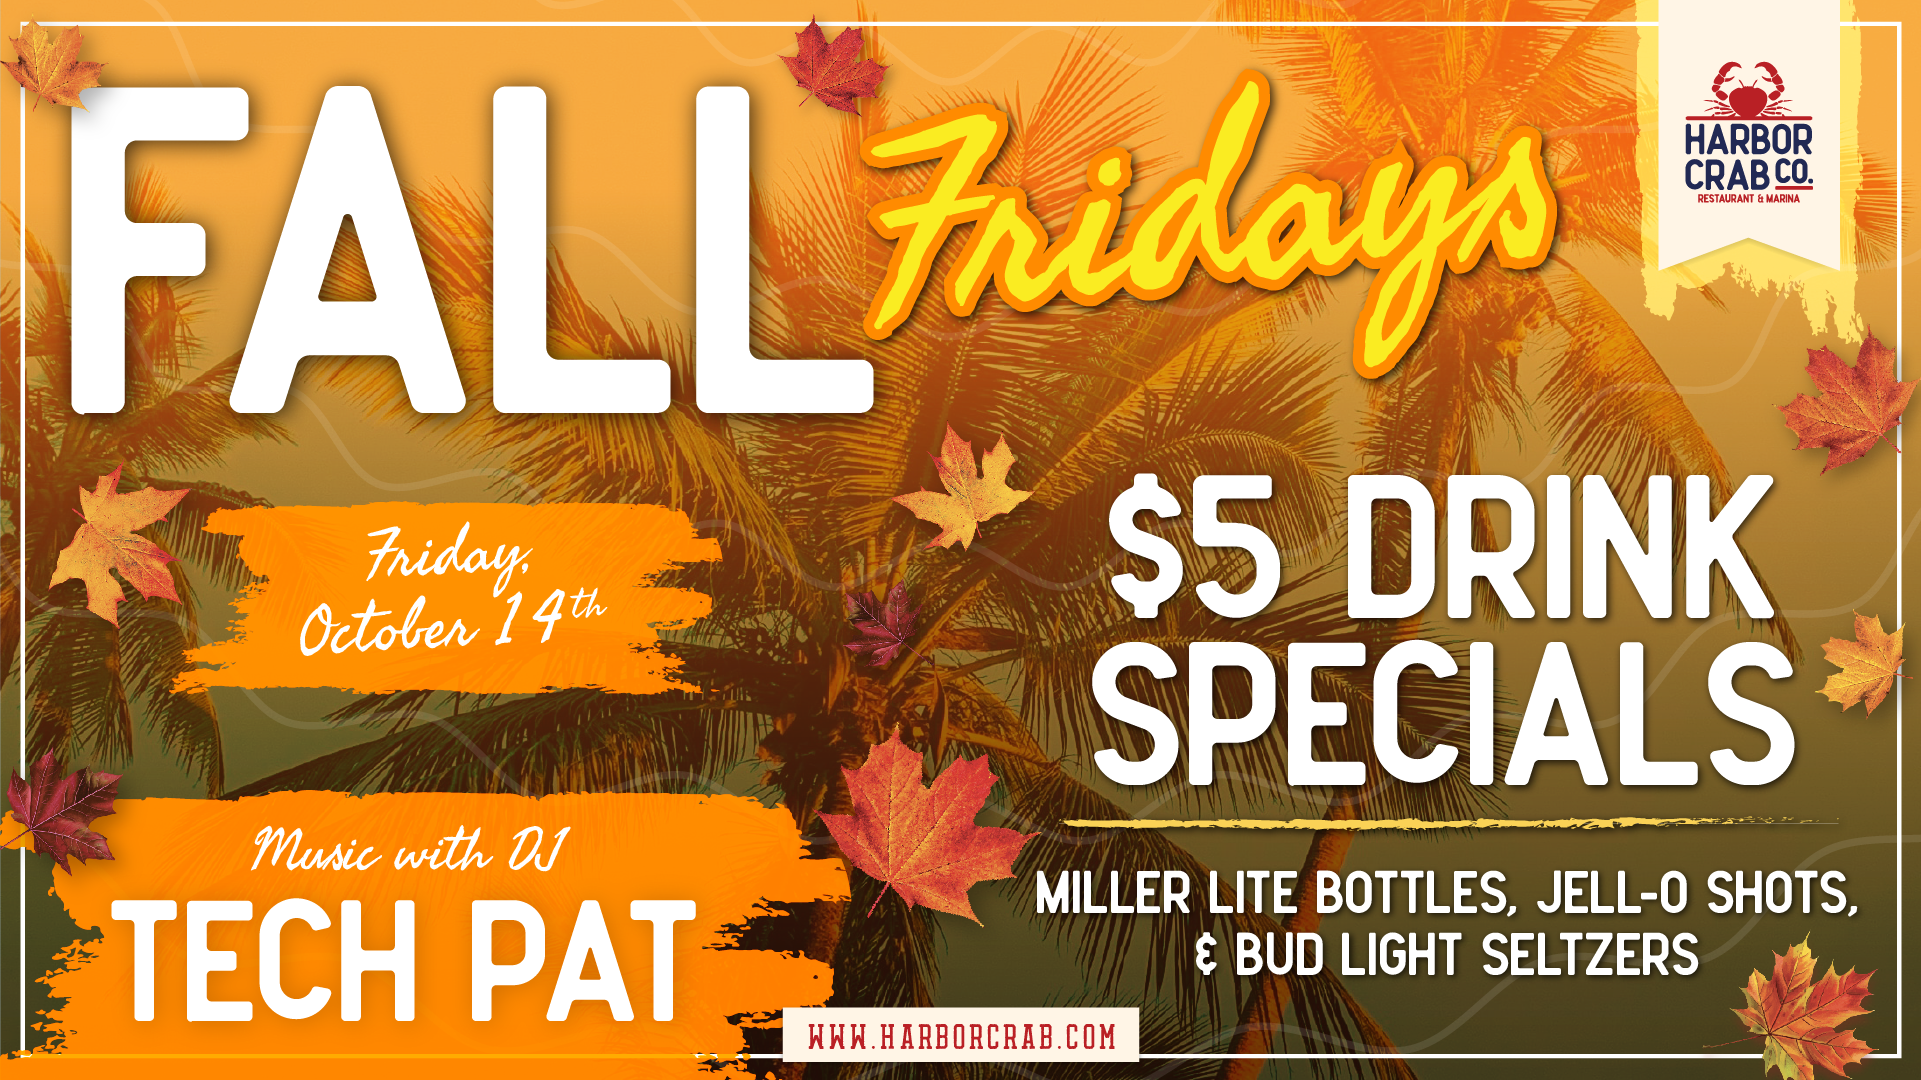 Flyer for Fall Friday on October 14th